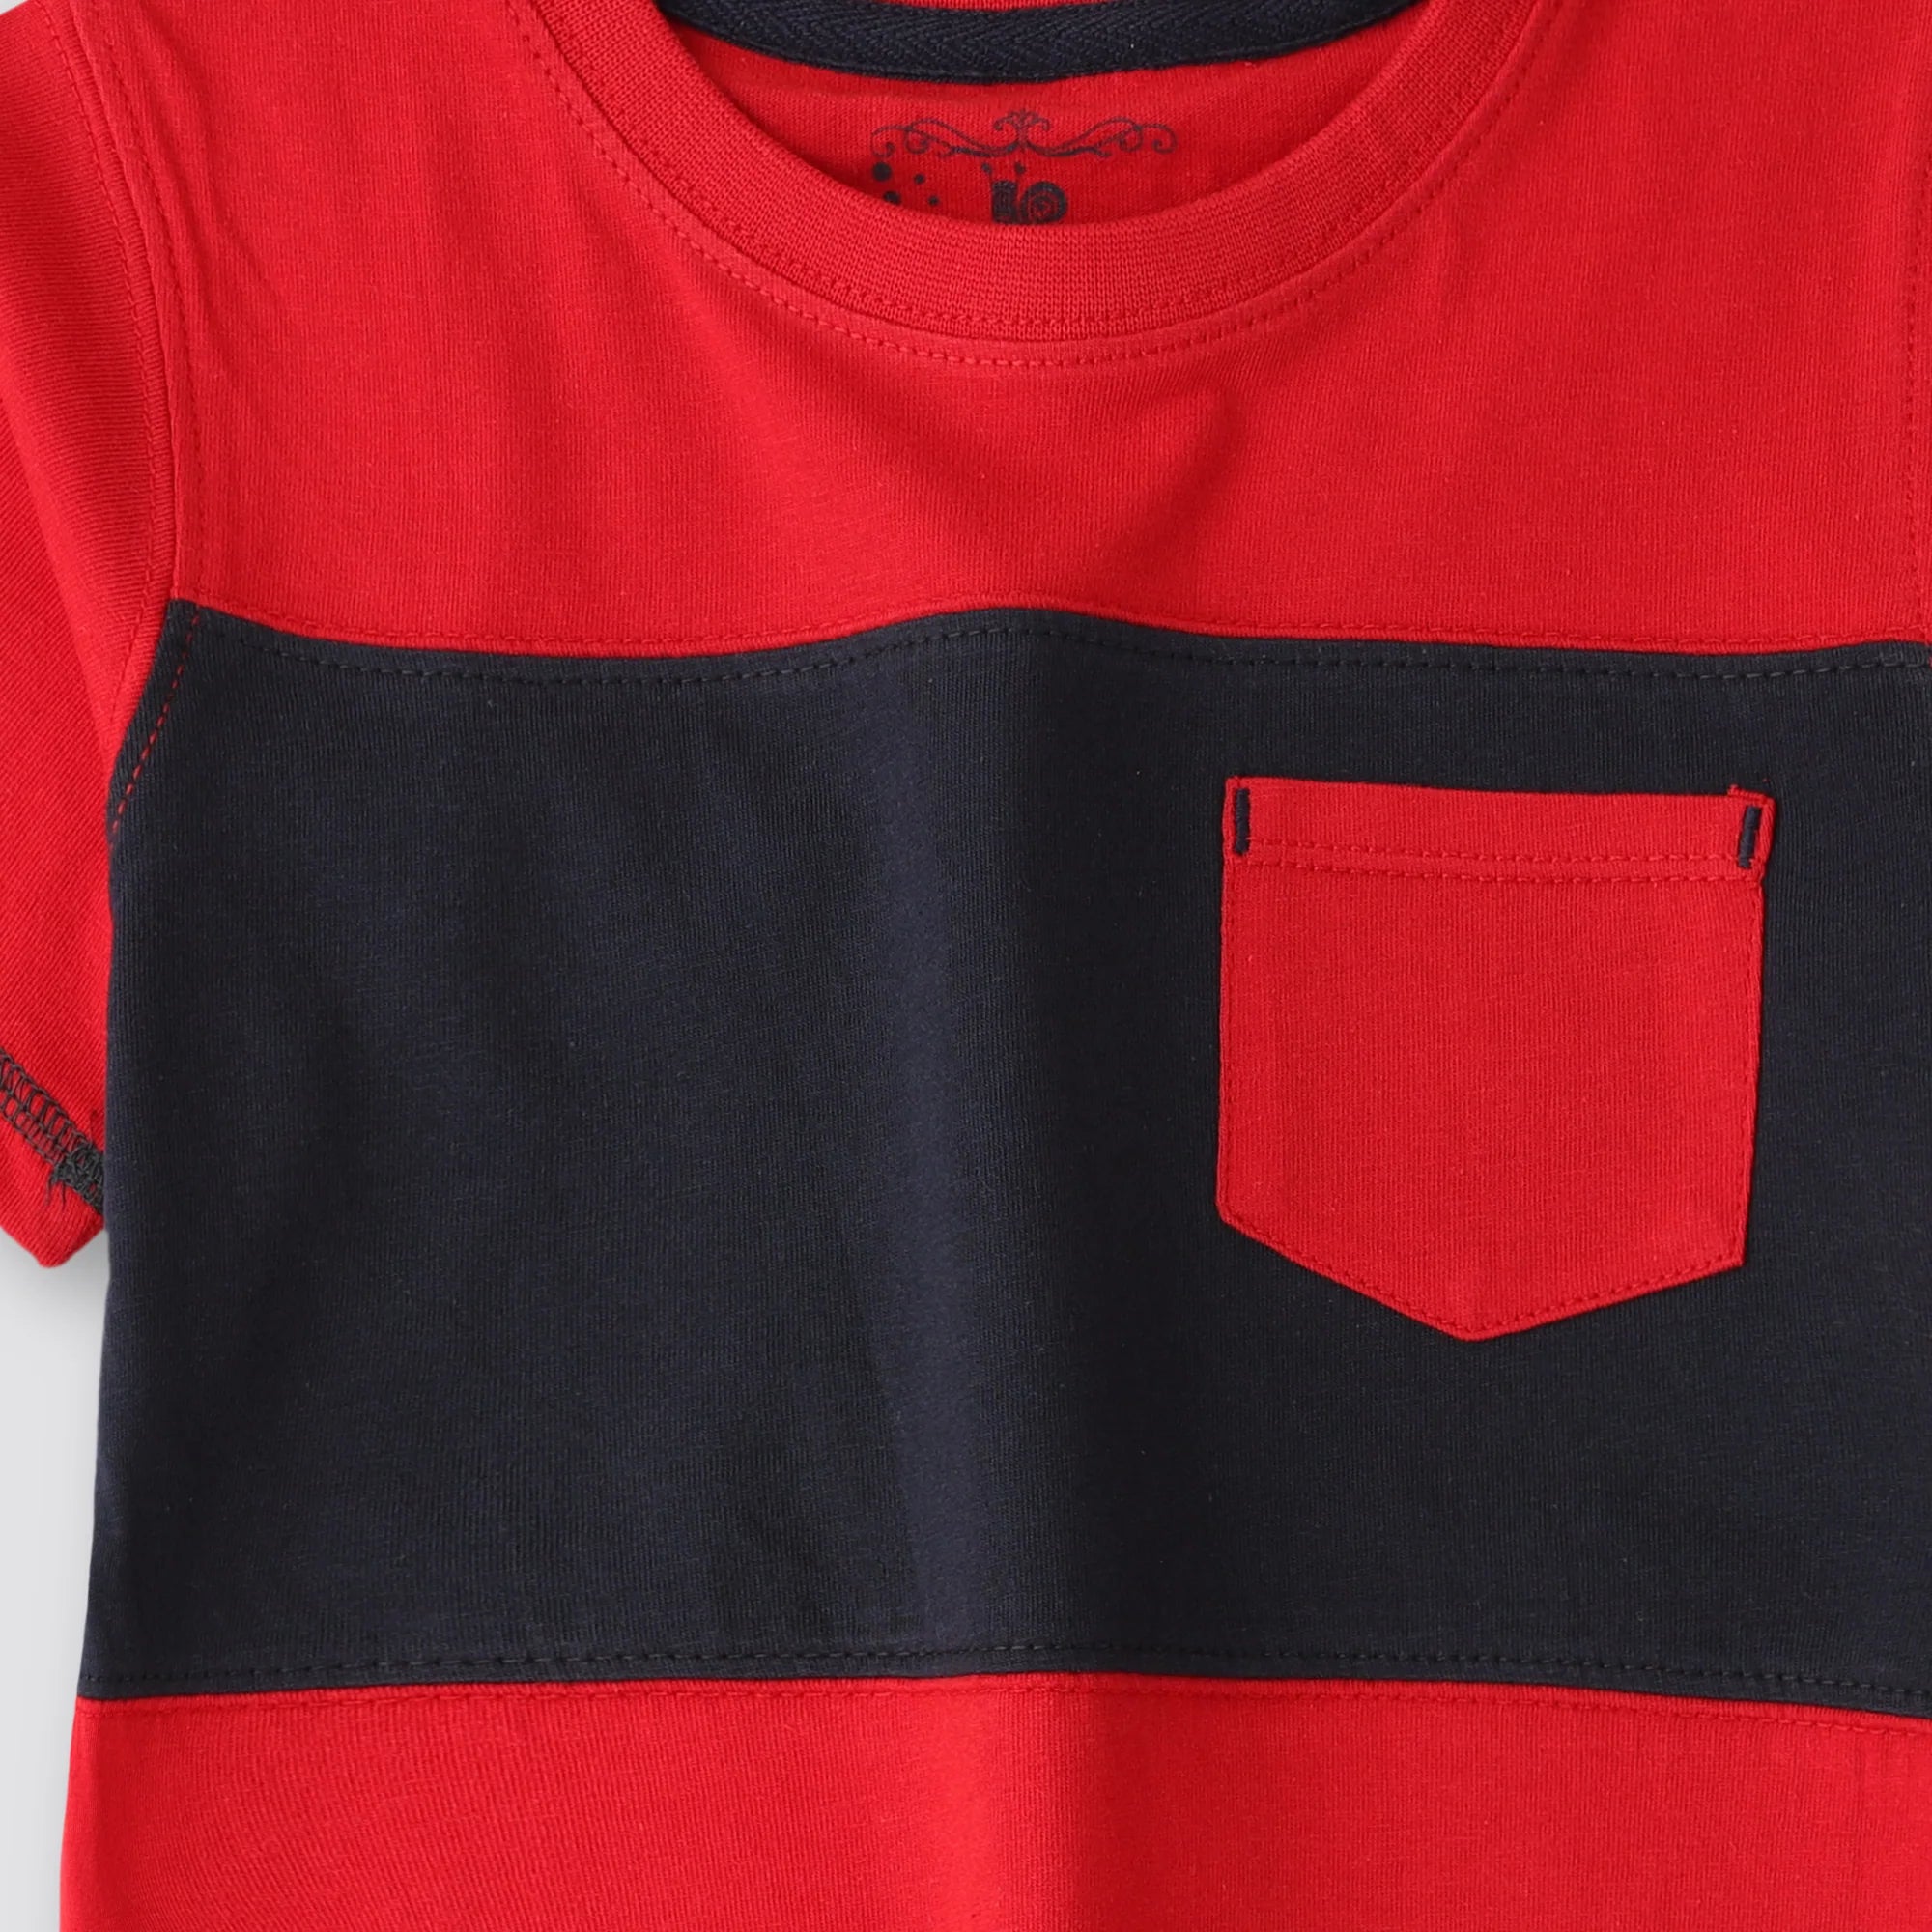 Classic Stripe Red Tee with Pocket